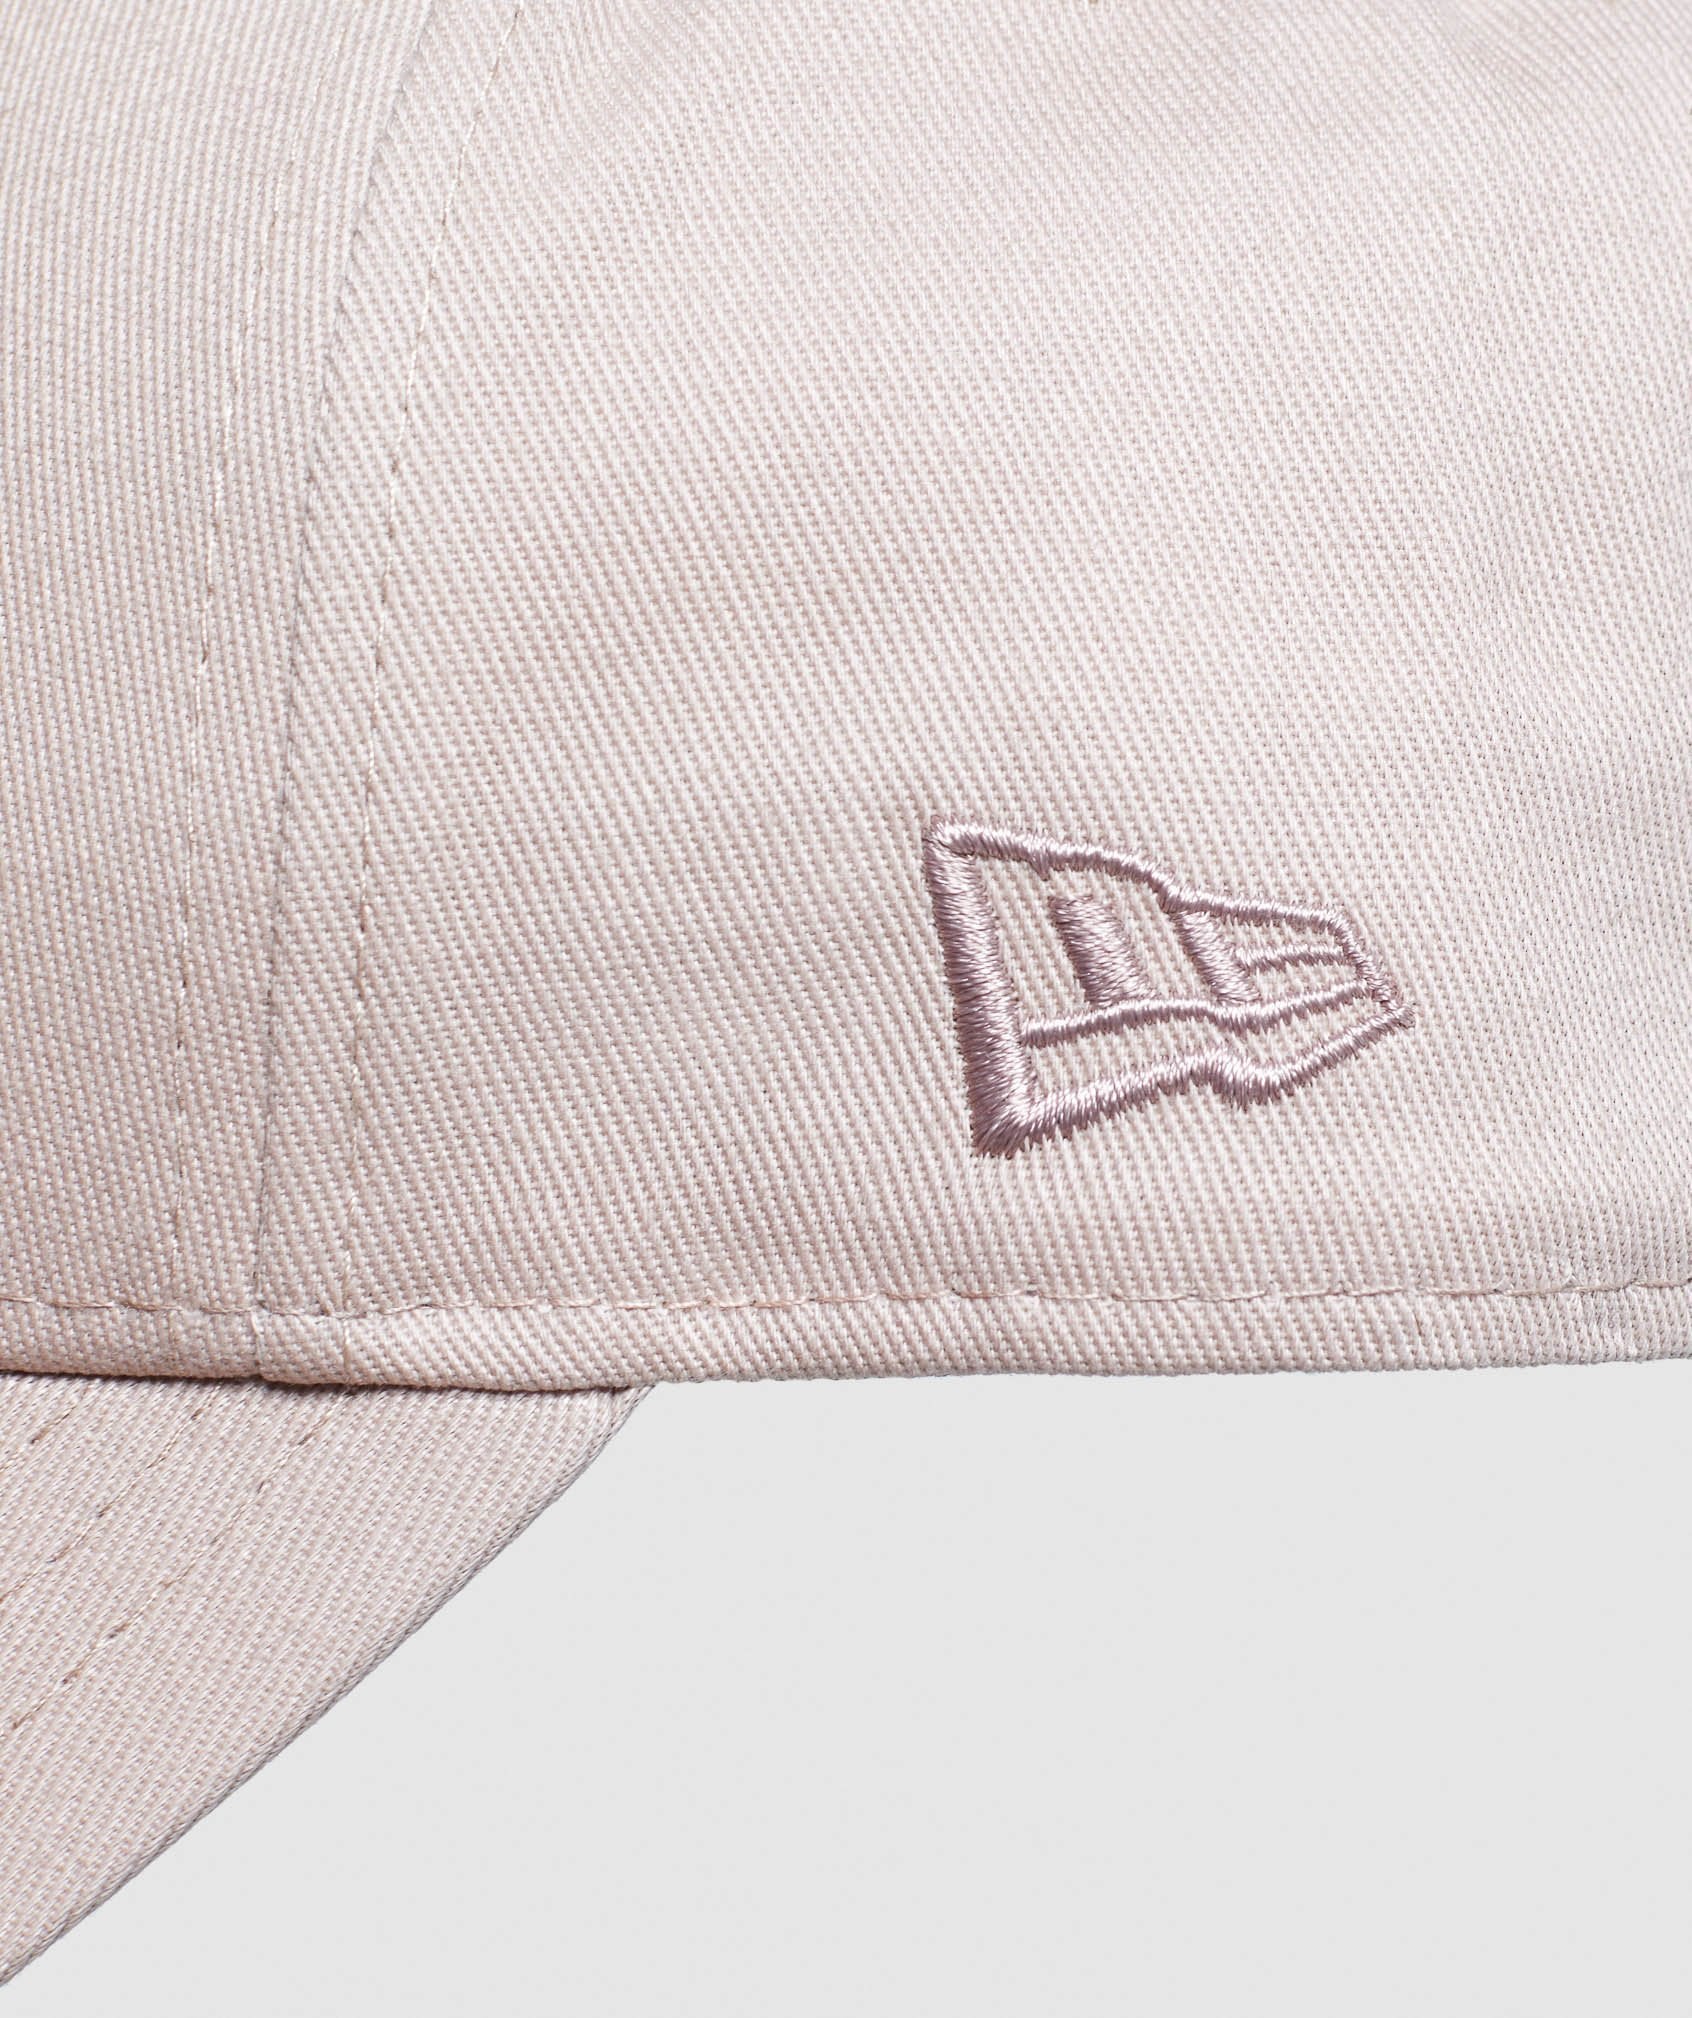 New Era 9FORTY Adjustable in Nude - view 4